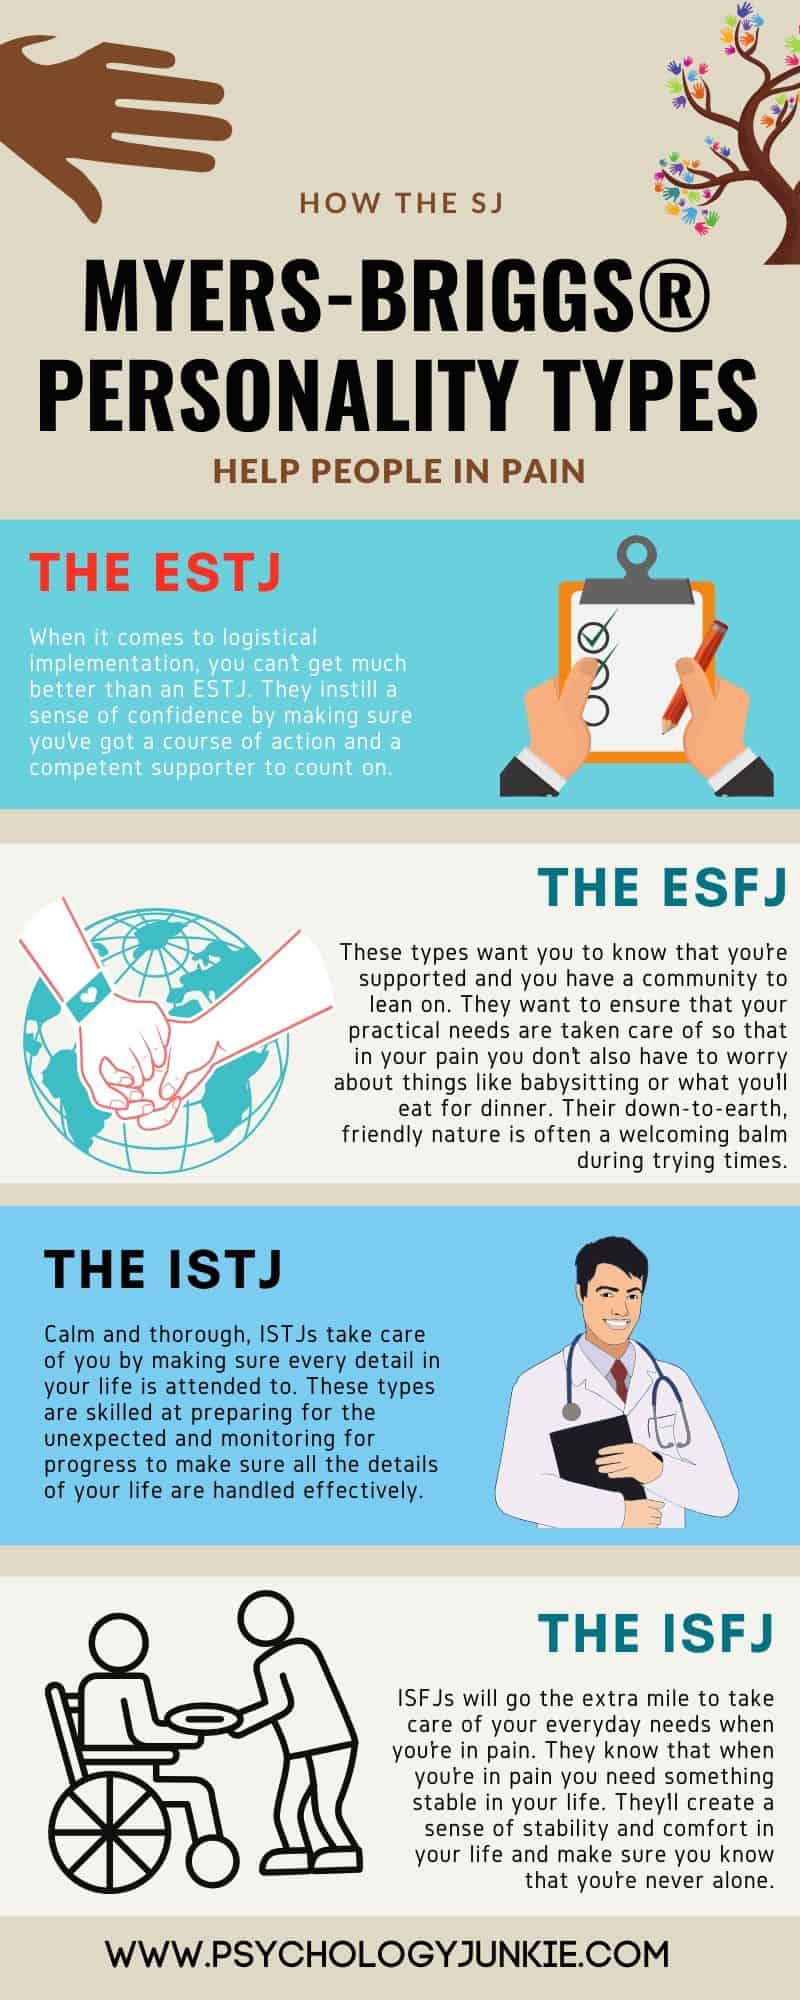 Find out how each of the Sensing-Judging personality types helps those who are struggling or in pain. #MBTI #Personality #ISFJ #ISTJ